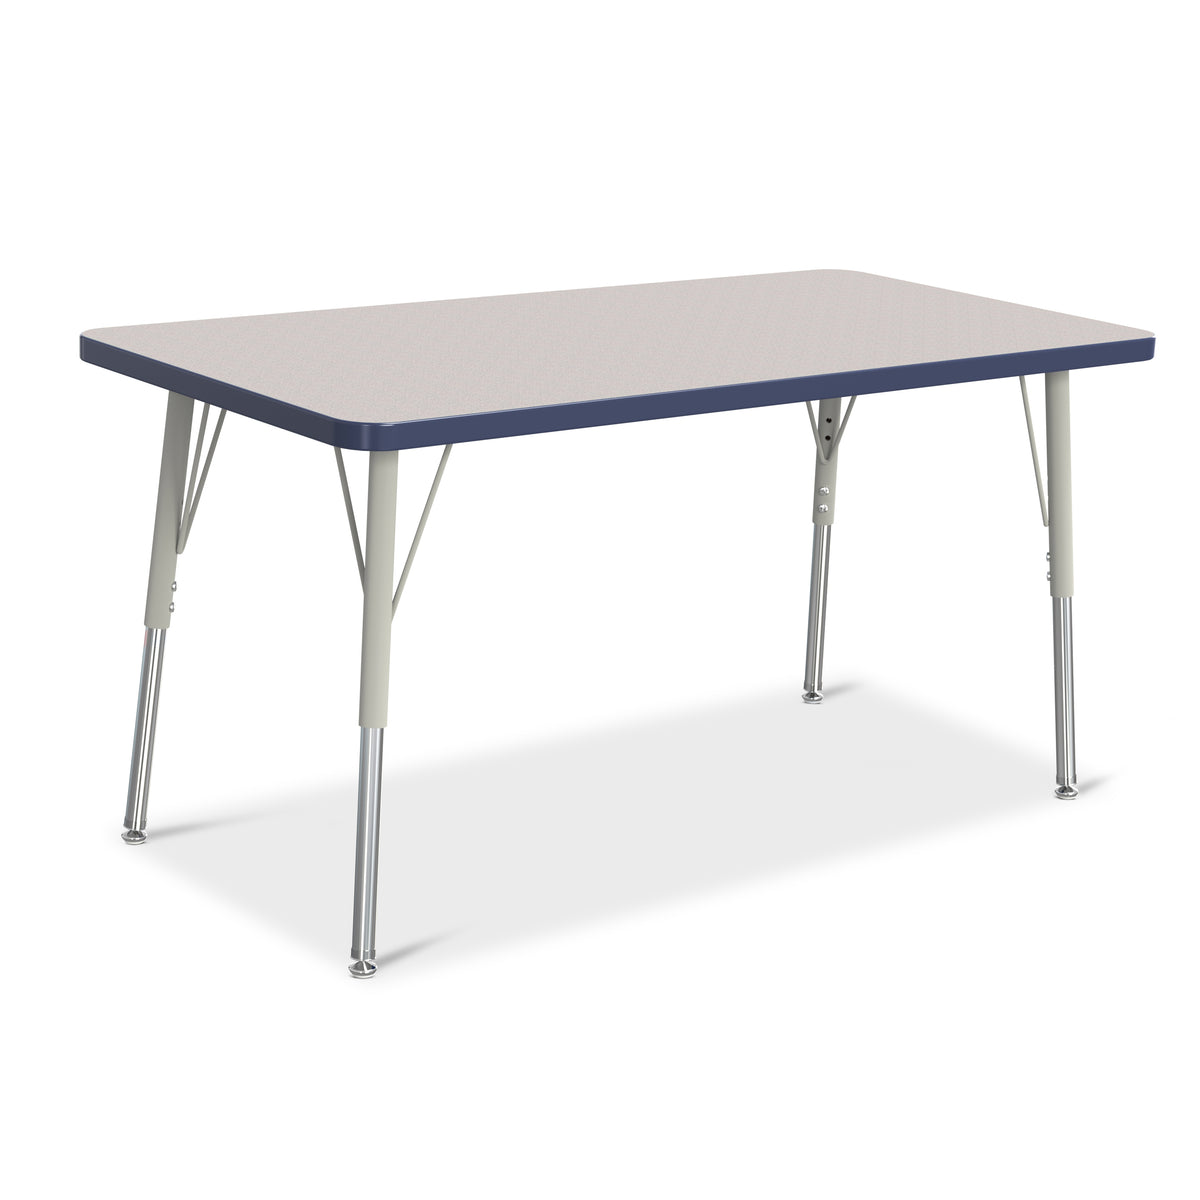 6403JCA112, Berries Rectangle Activity Table - 24" X 48", A-height - Freckled Gray/Navy/Gray